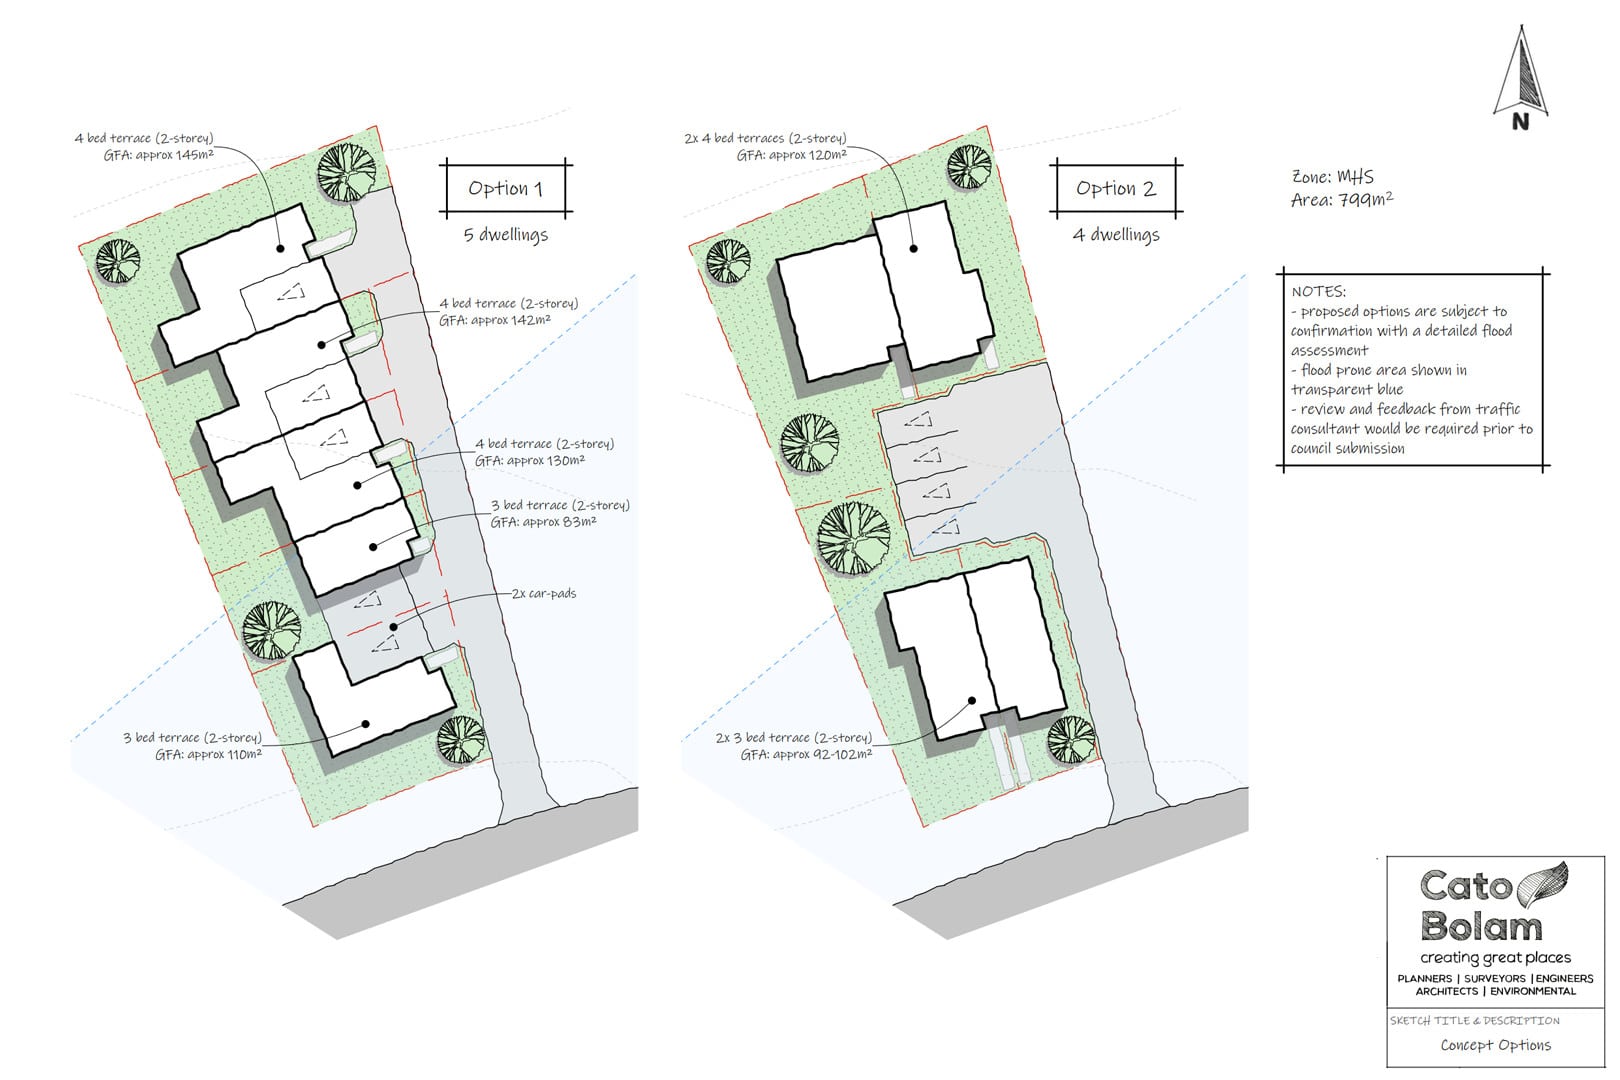 4 Brentford Place MHS - Property Development - The Importance of Initial Development Feasibility and Concept Option Analysis